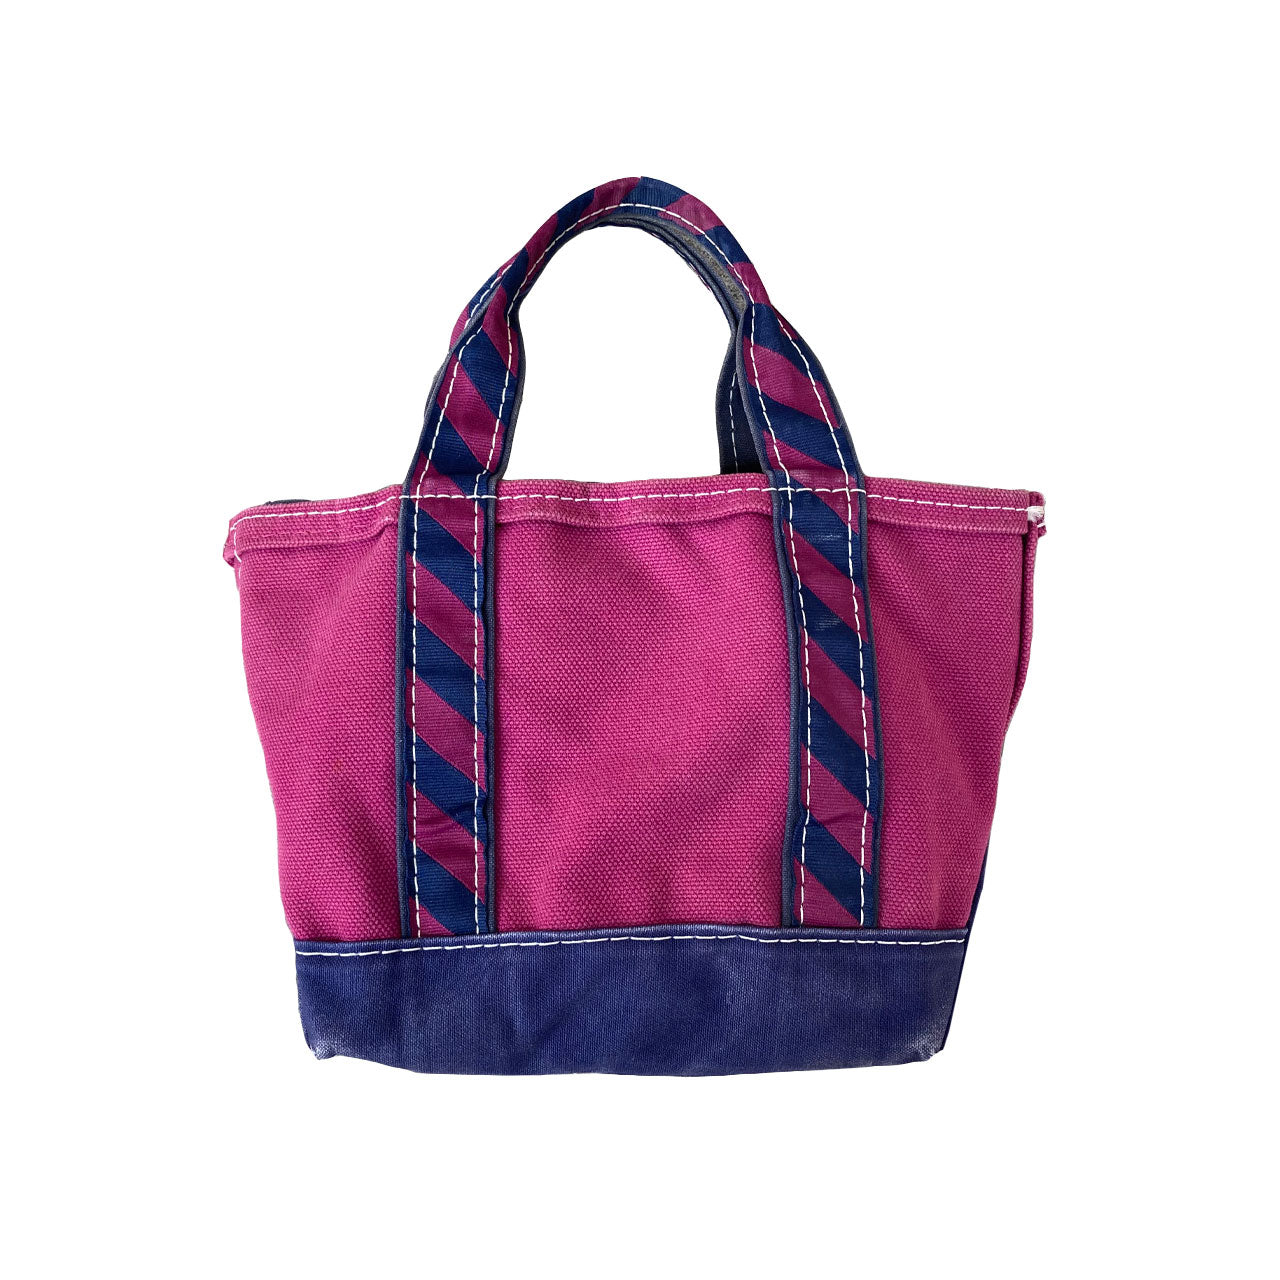 MADE BY L.L.Bean BOTE AND TOTE